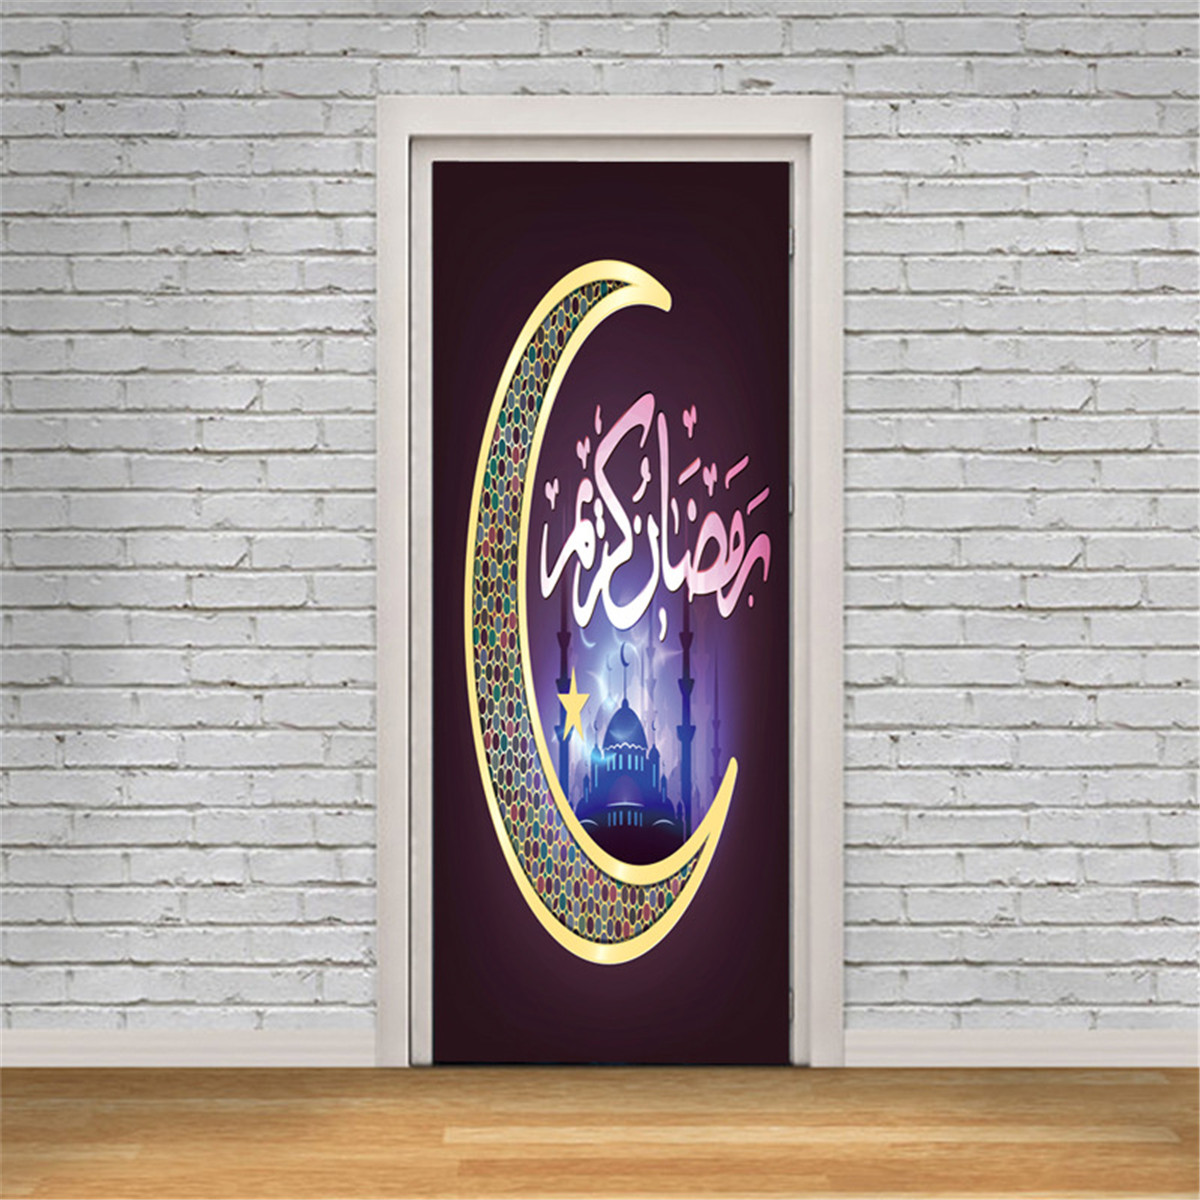 3D-Islamic-Wall-Sticker-Door-Wall-Paper-Removable-Wall-Decal-Office-Home-Living-Room-Bedroom-Decorat-1755284-2